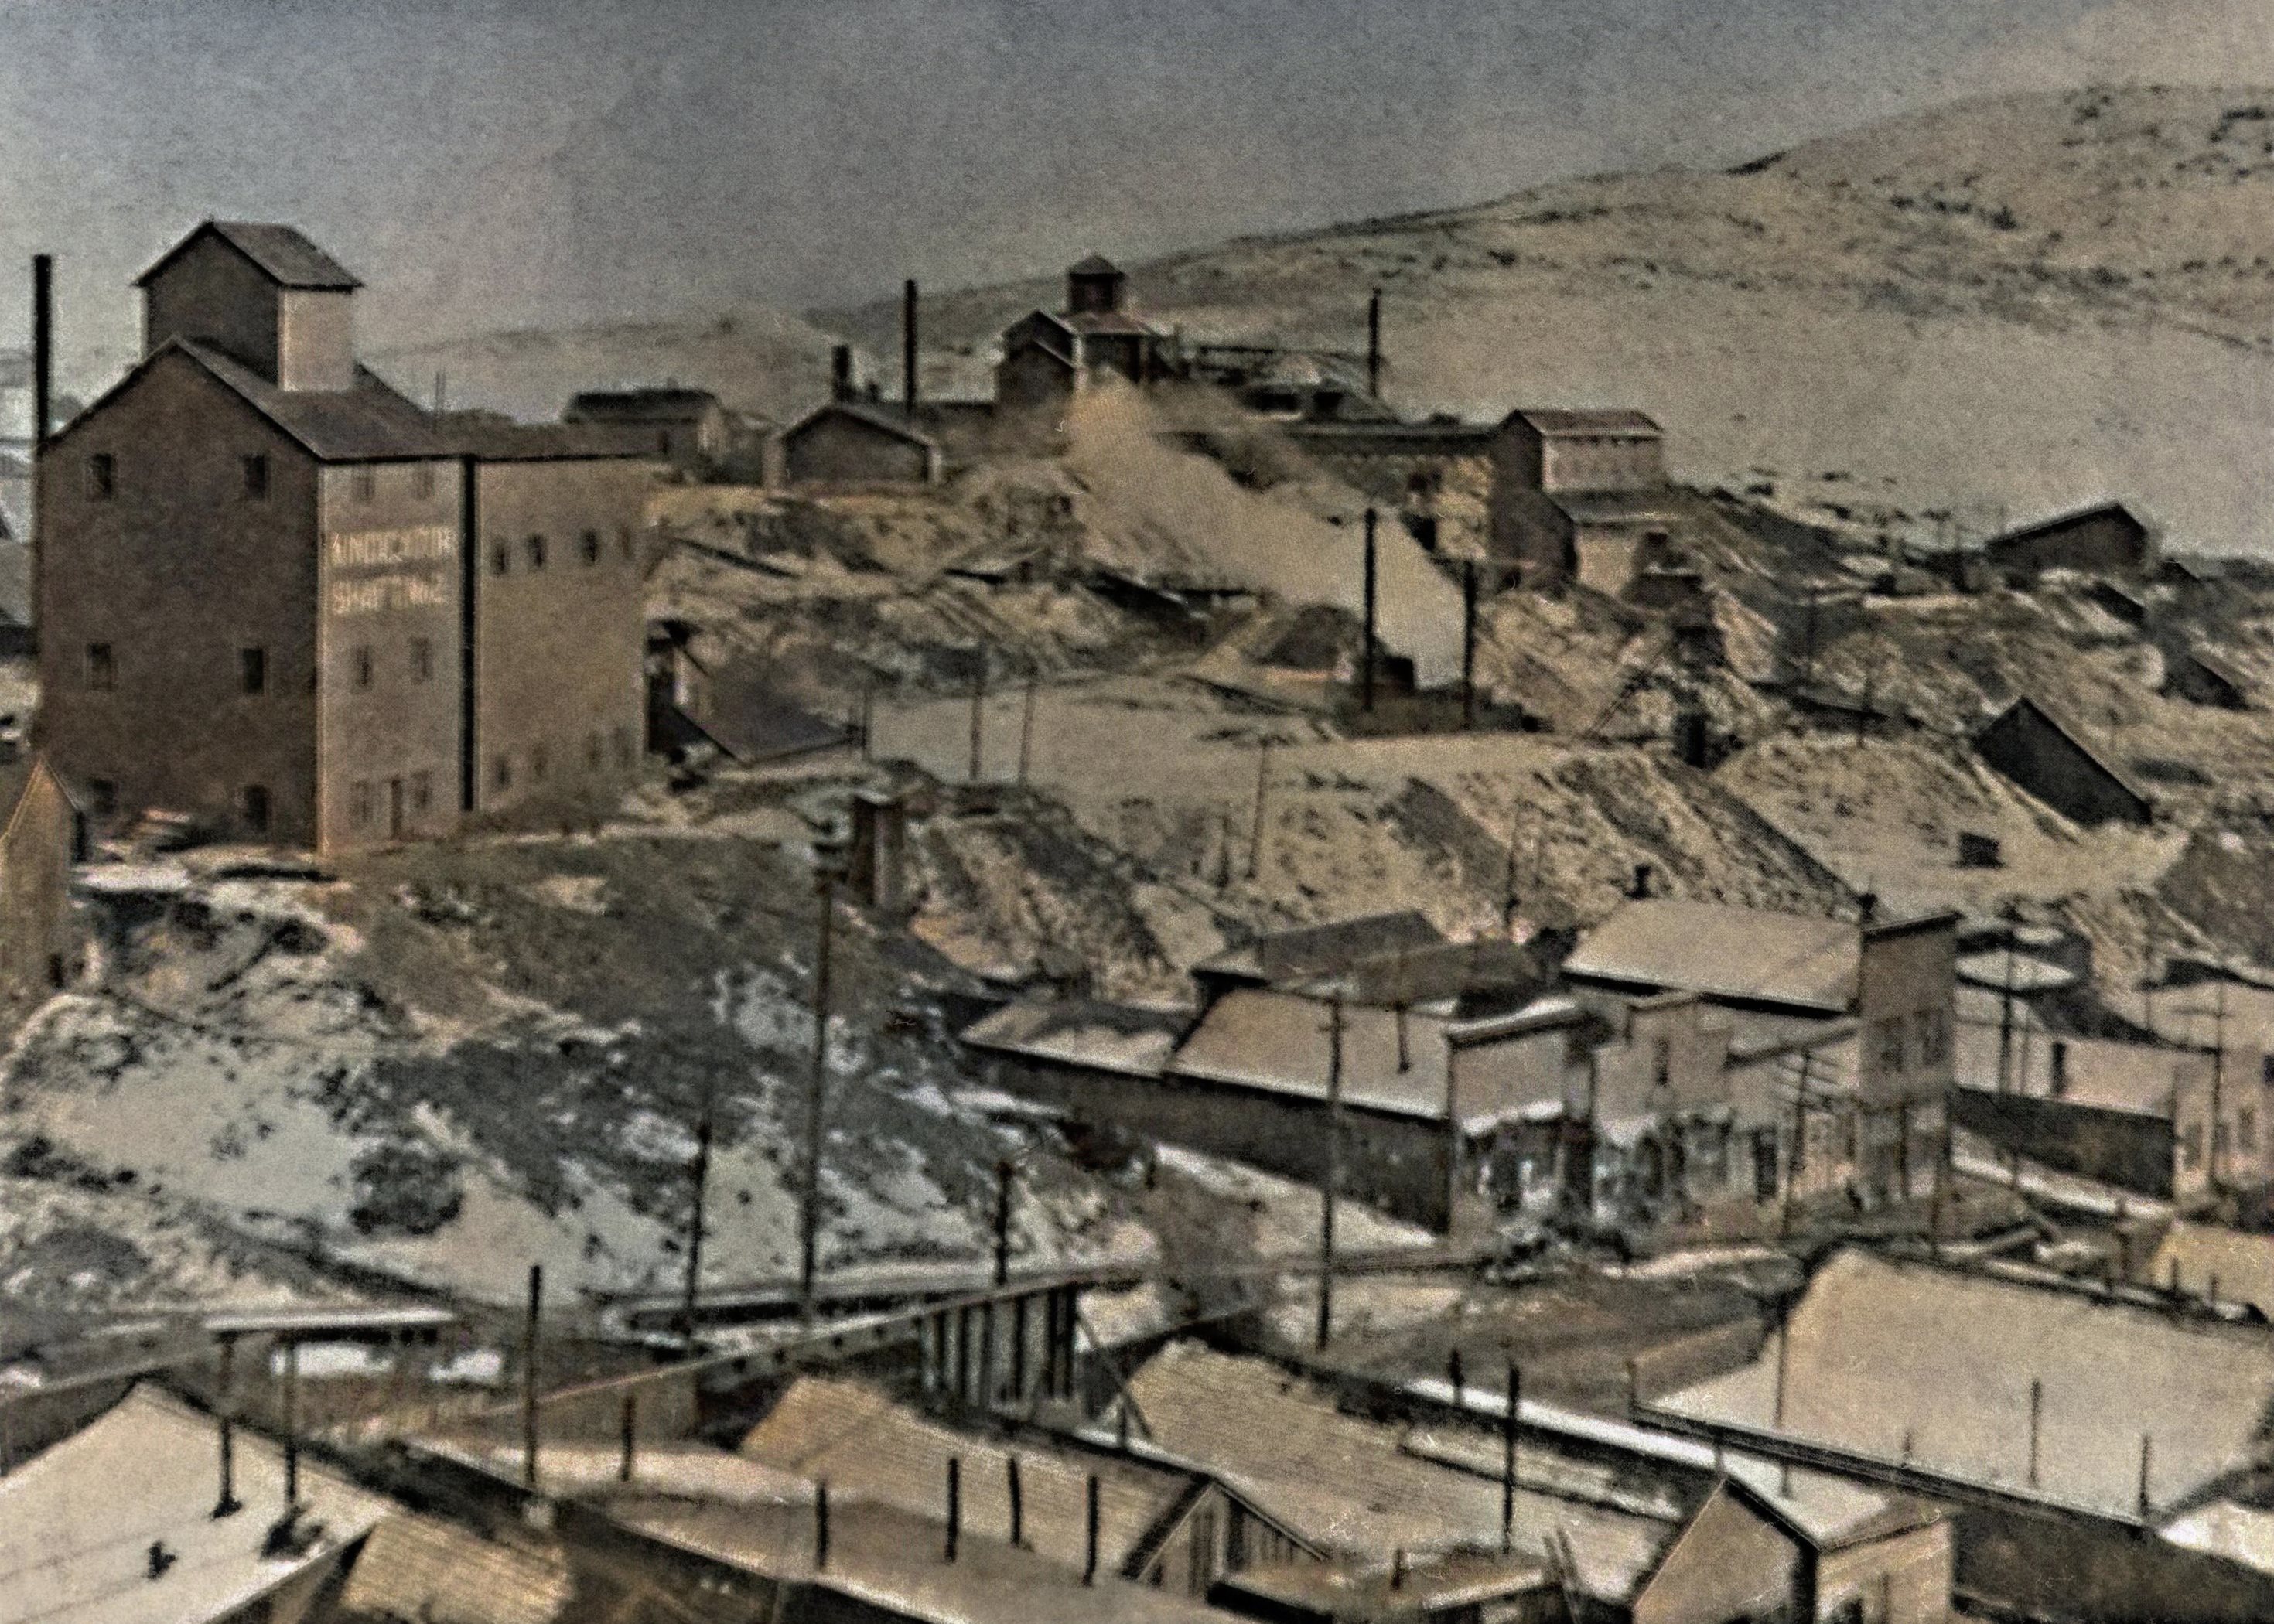 Vindicator Mine Shaft No. 2 and Town of Independence